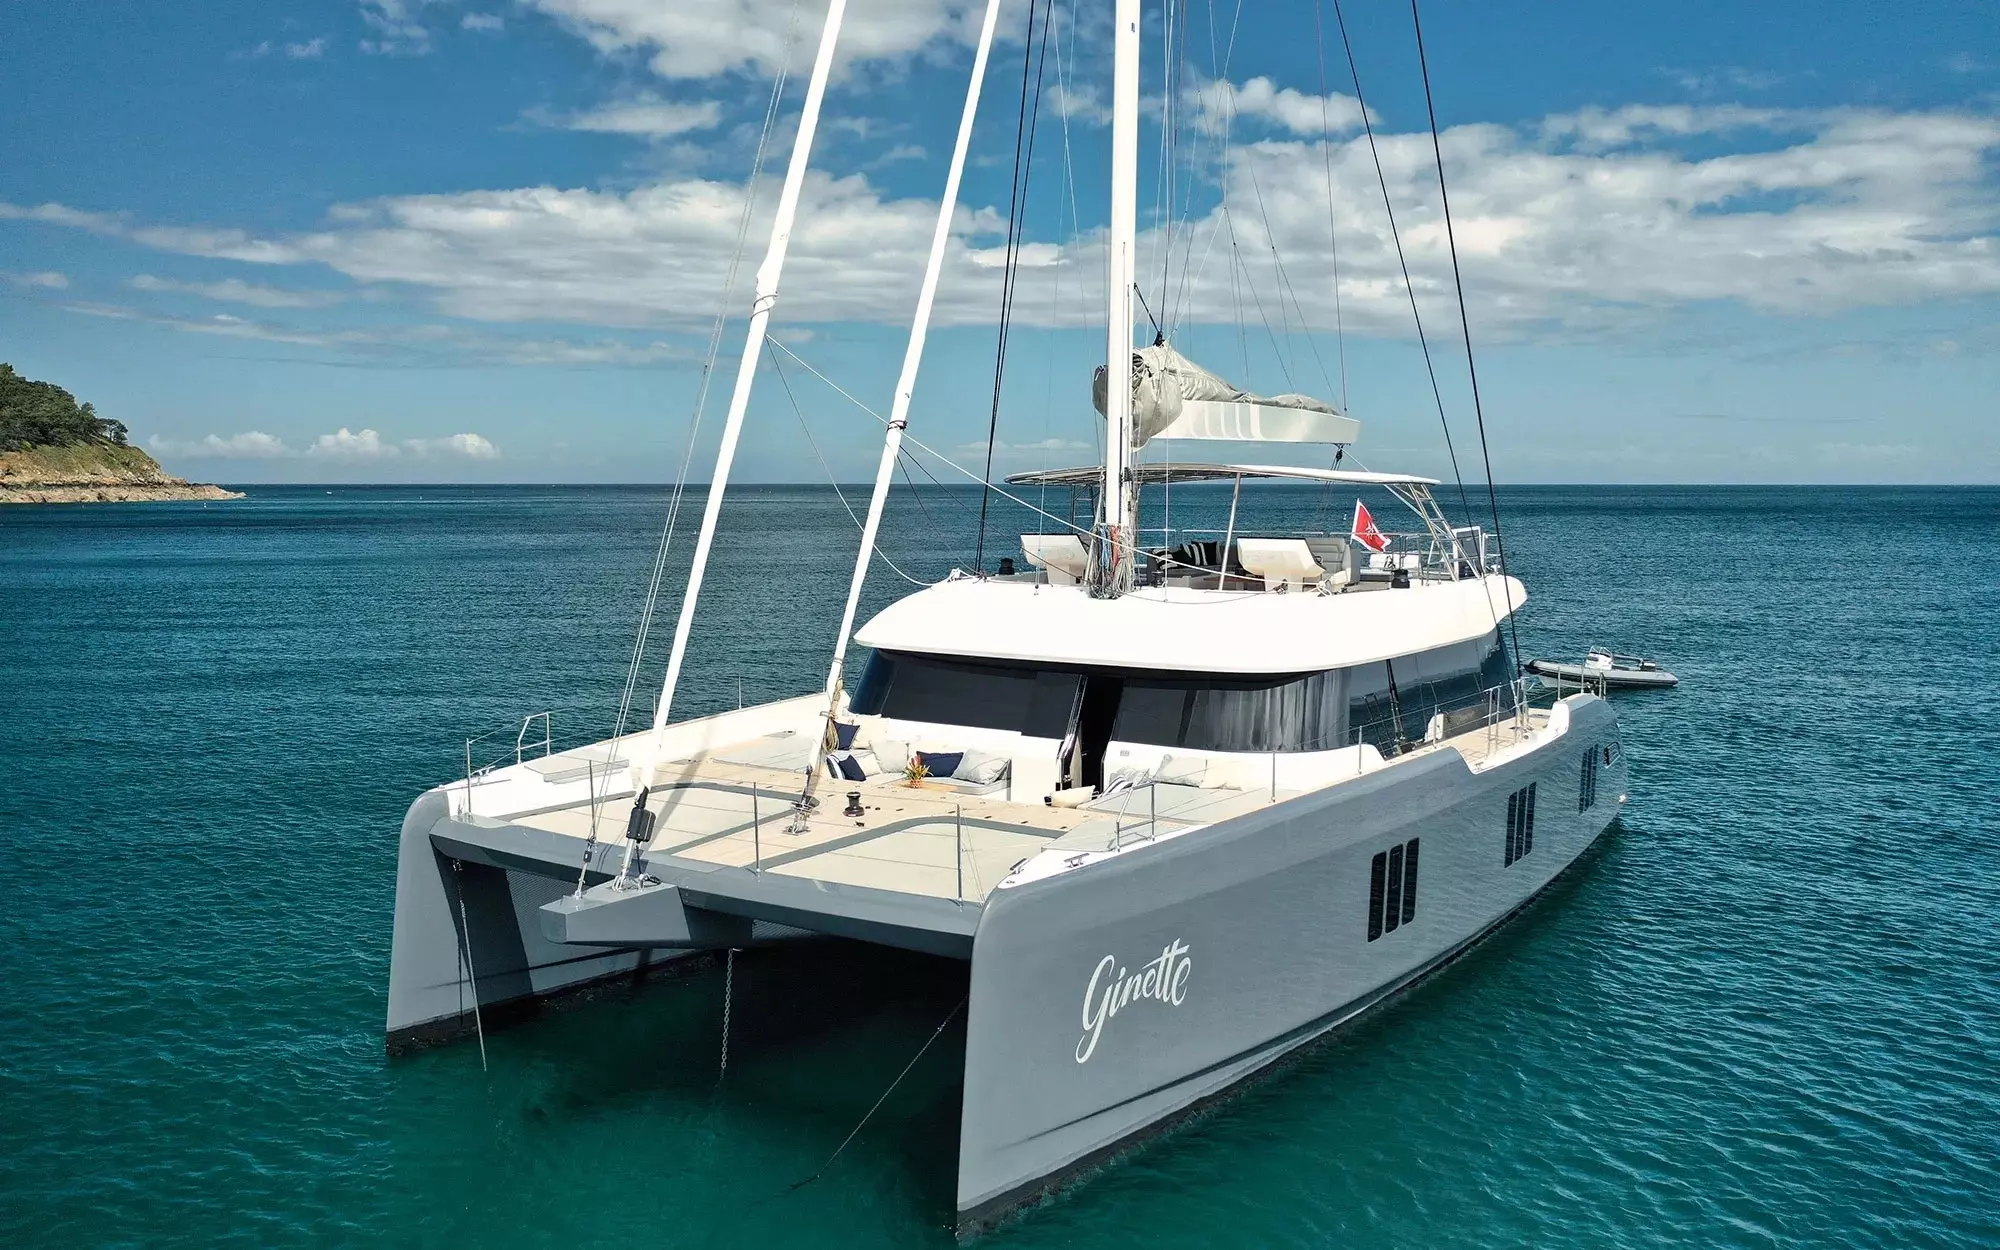 Ginette by Sunreef Yachts - Special Offer for a private Luxury Catamaran Rental in Suva with a crew